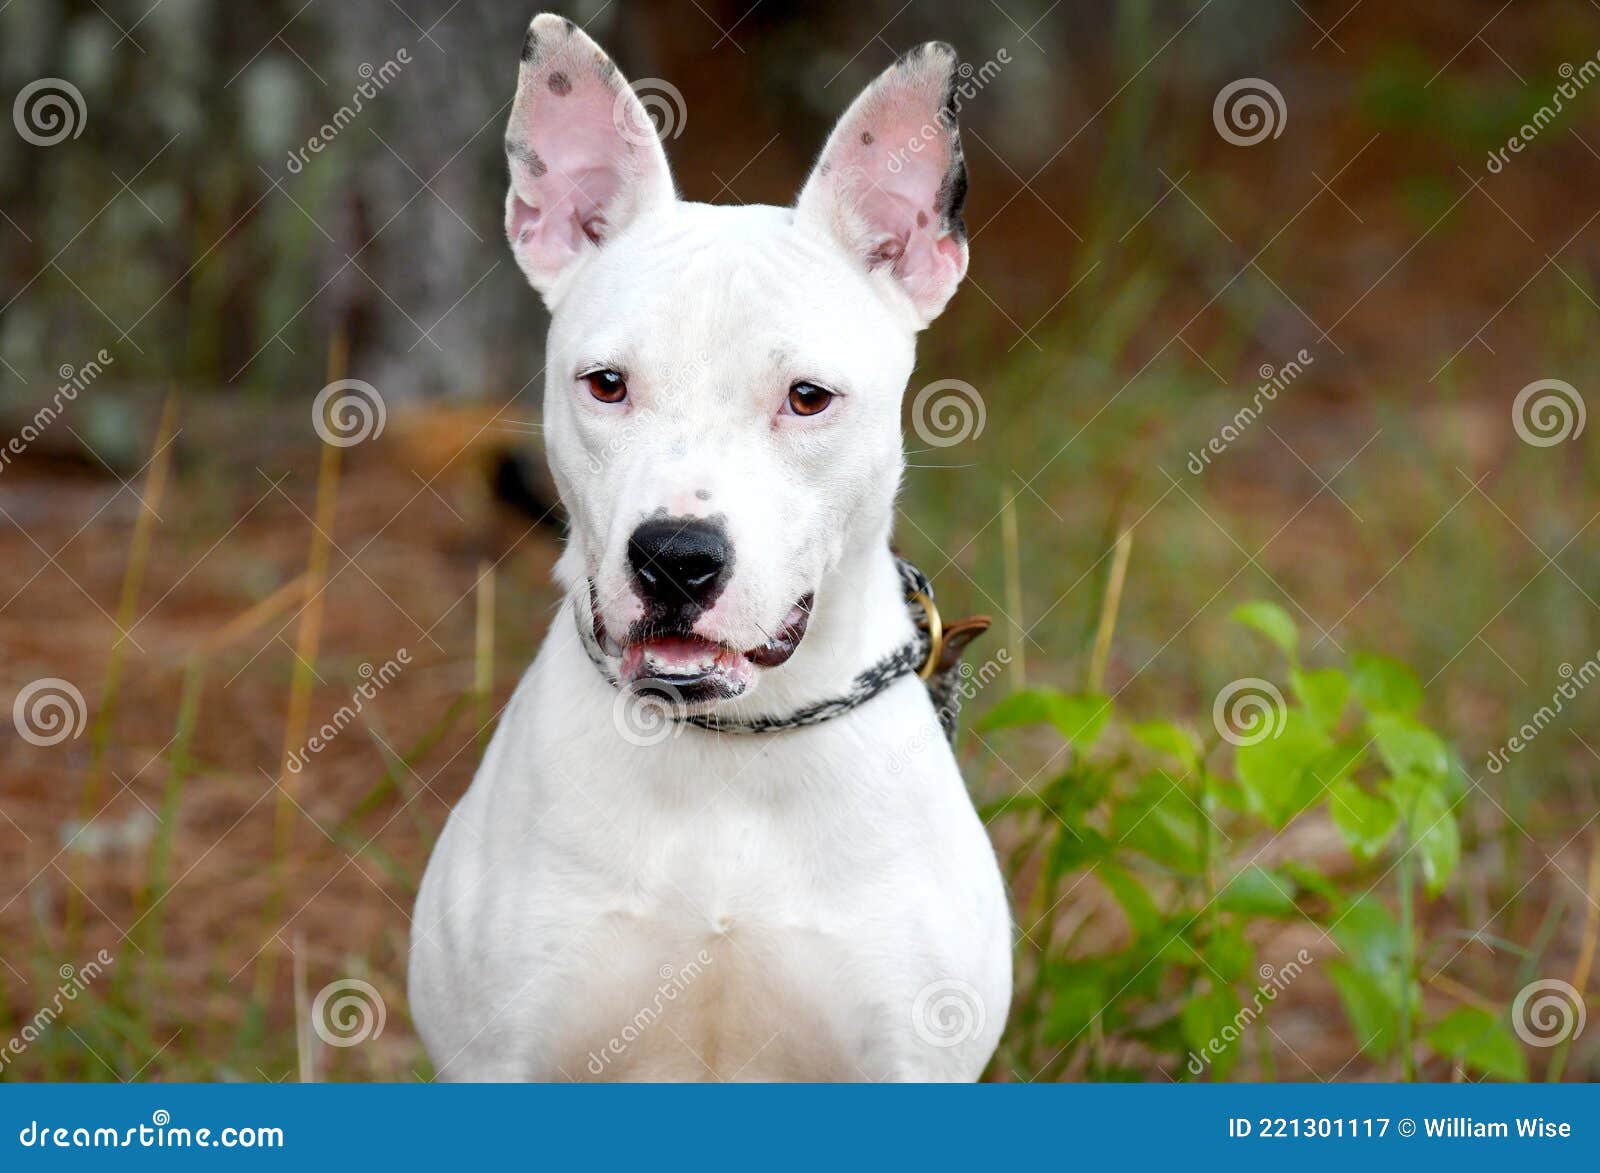 Happy Bull Terrier Breed Dog with Big Ears Stock Image - Image animal, local: 221301117